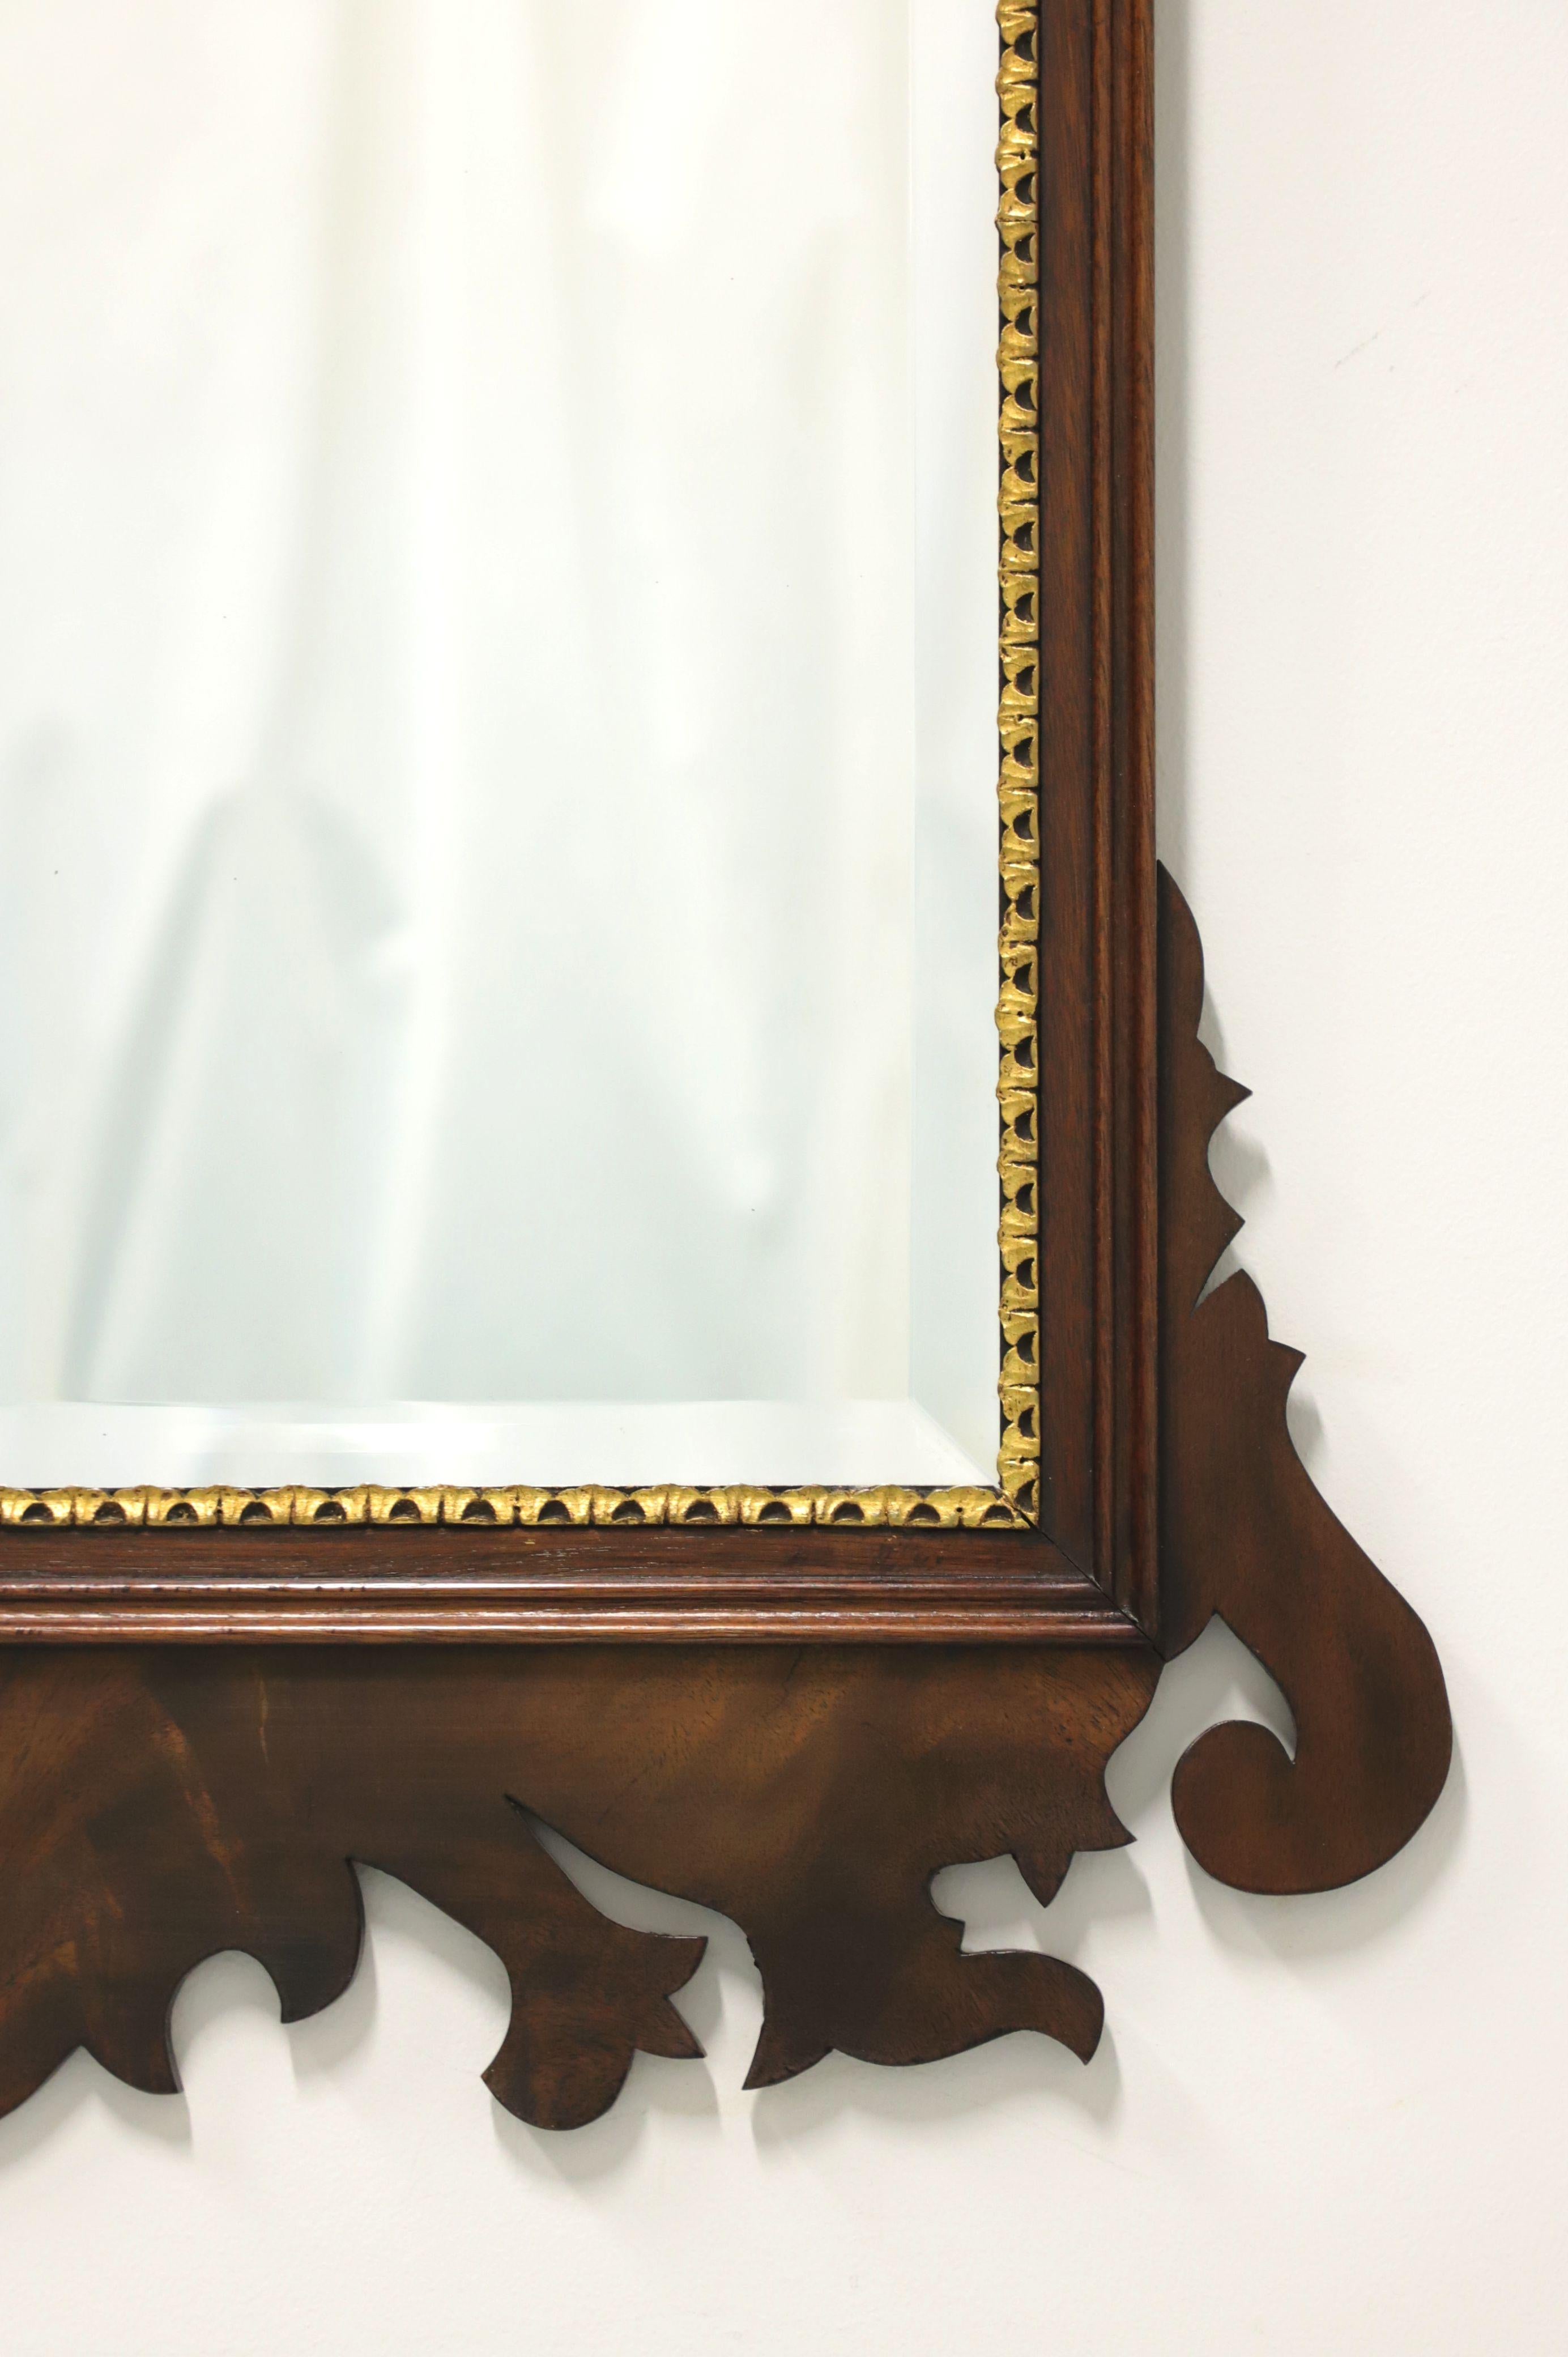 HENKEL HARRIS H-6 29 Mahogany Chippendale Wall Mirror - A In Good Condition For Sale In Charlotte, NC